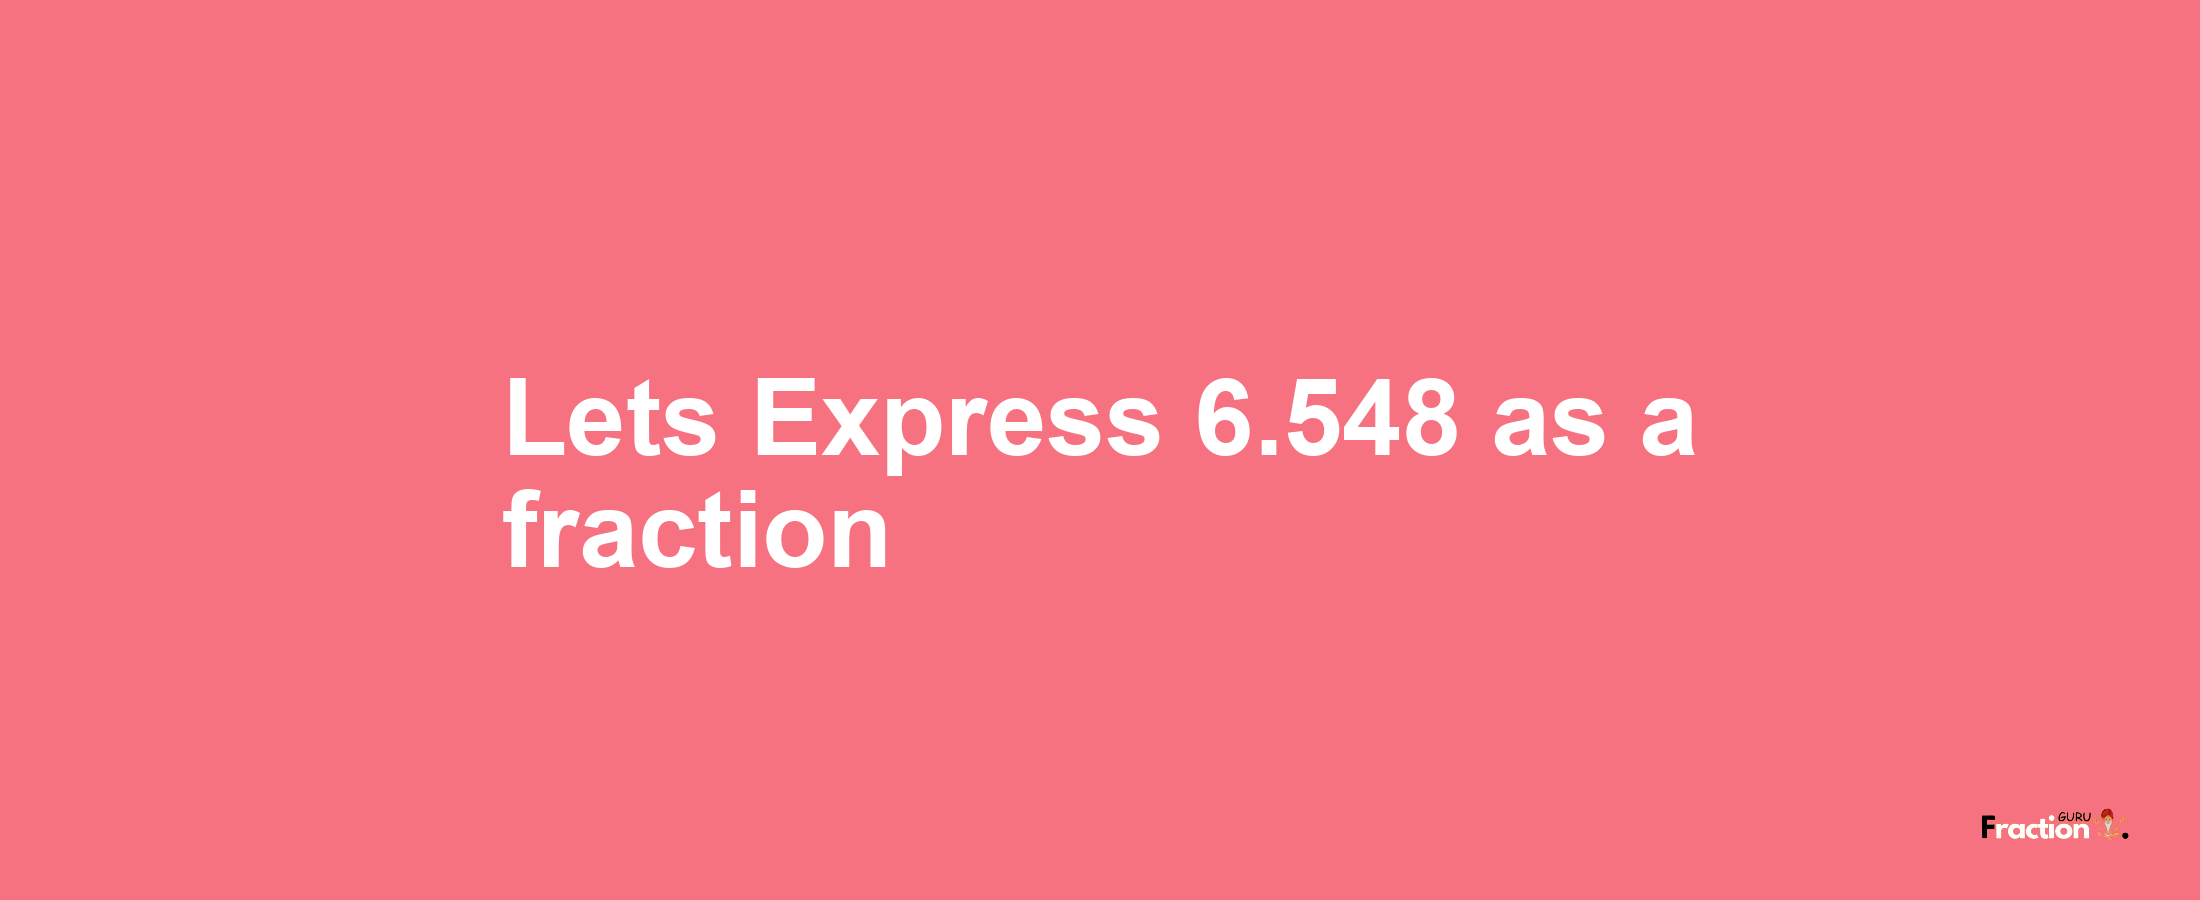 Lets Express 6.548 as afraction